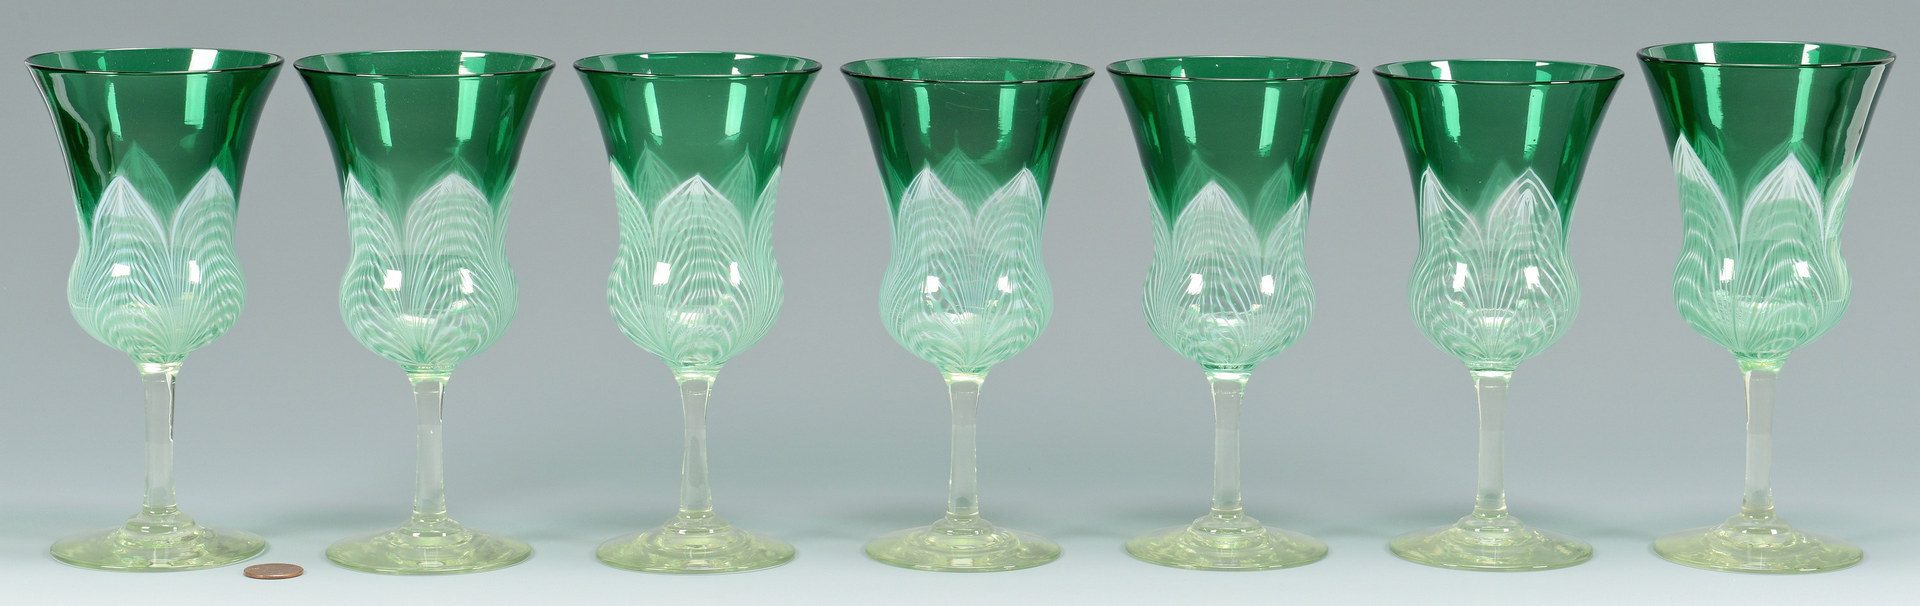 Lot 500: 7 Durand Peacock Feather Goblets